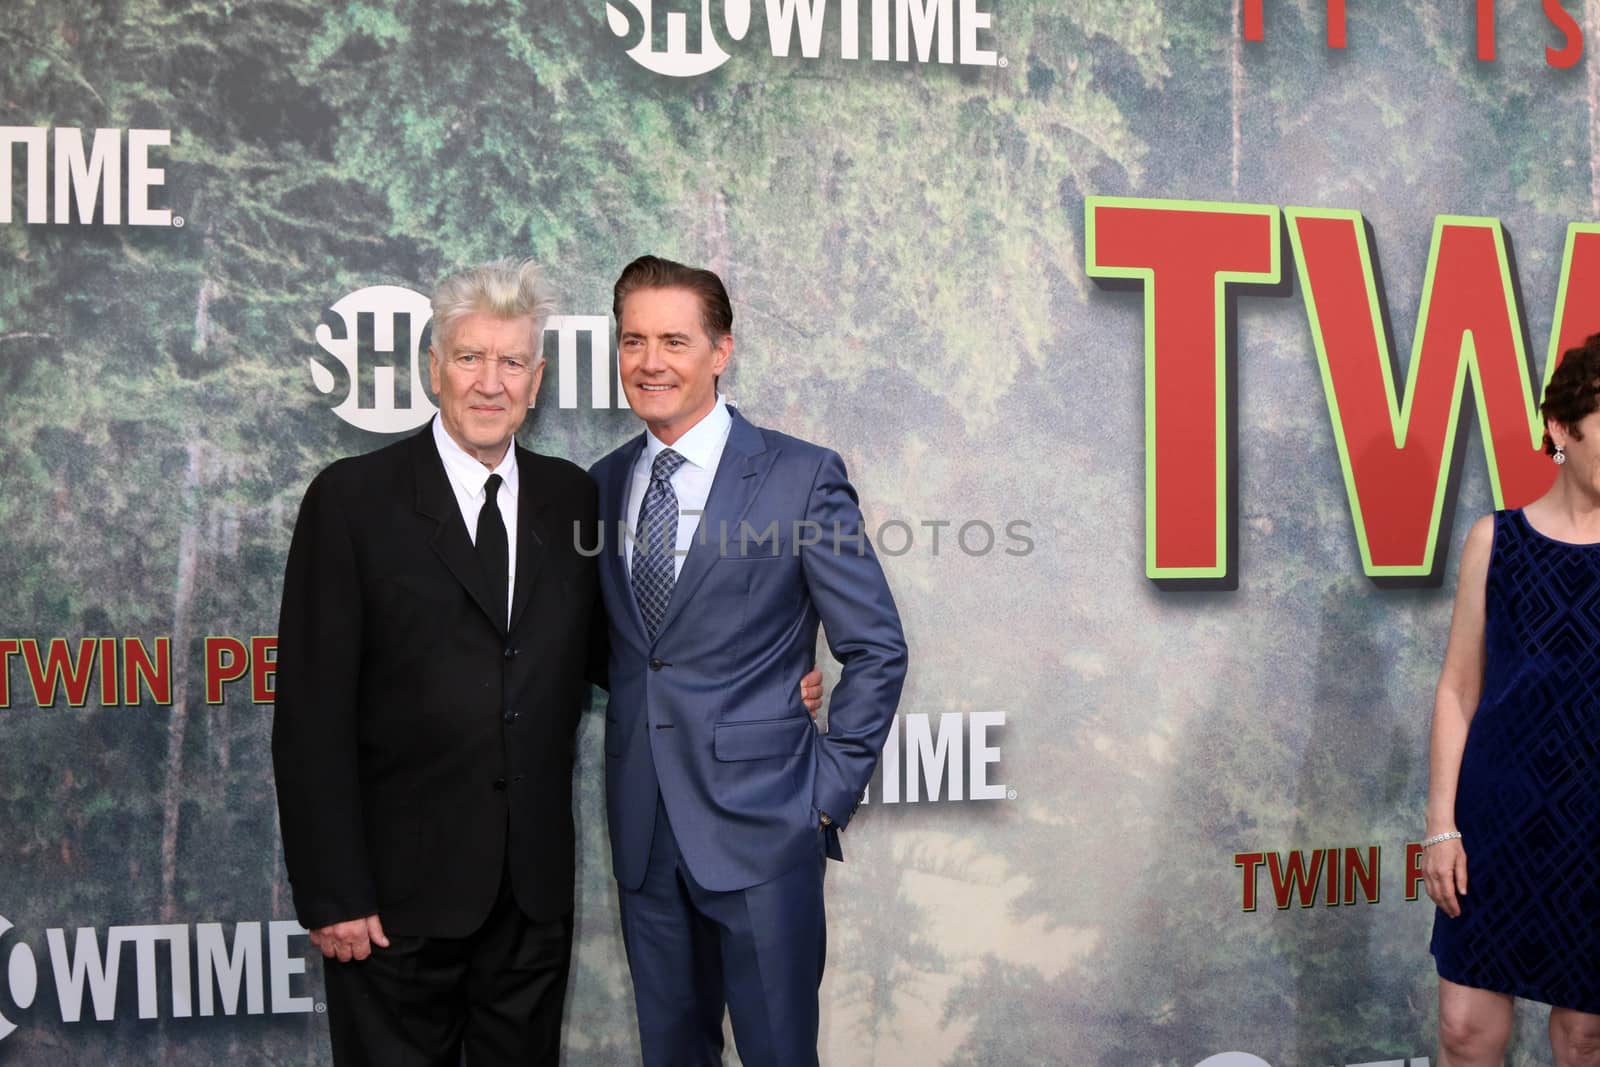 David Lynch, Kyle MacLachlan
at the "Twin Peaks" Premiere Screening, The Theater at Ace Hotel, Los Angeles, CA 05-19-17/ImageCollect by ImageCollect